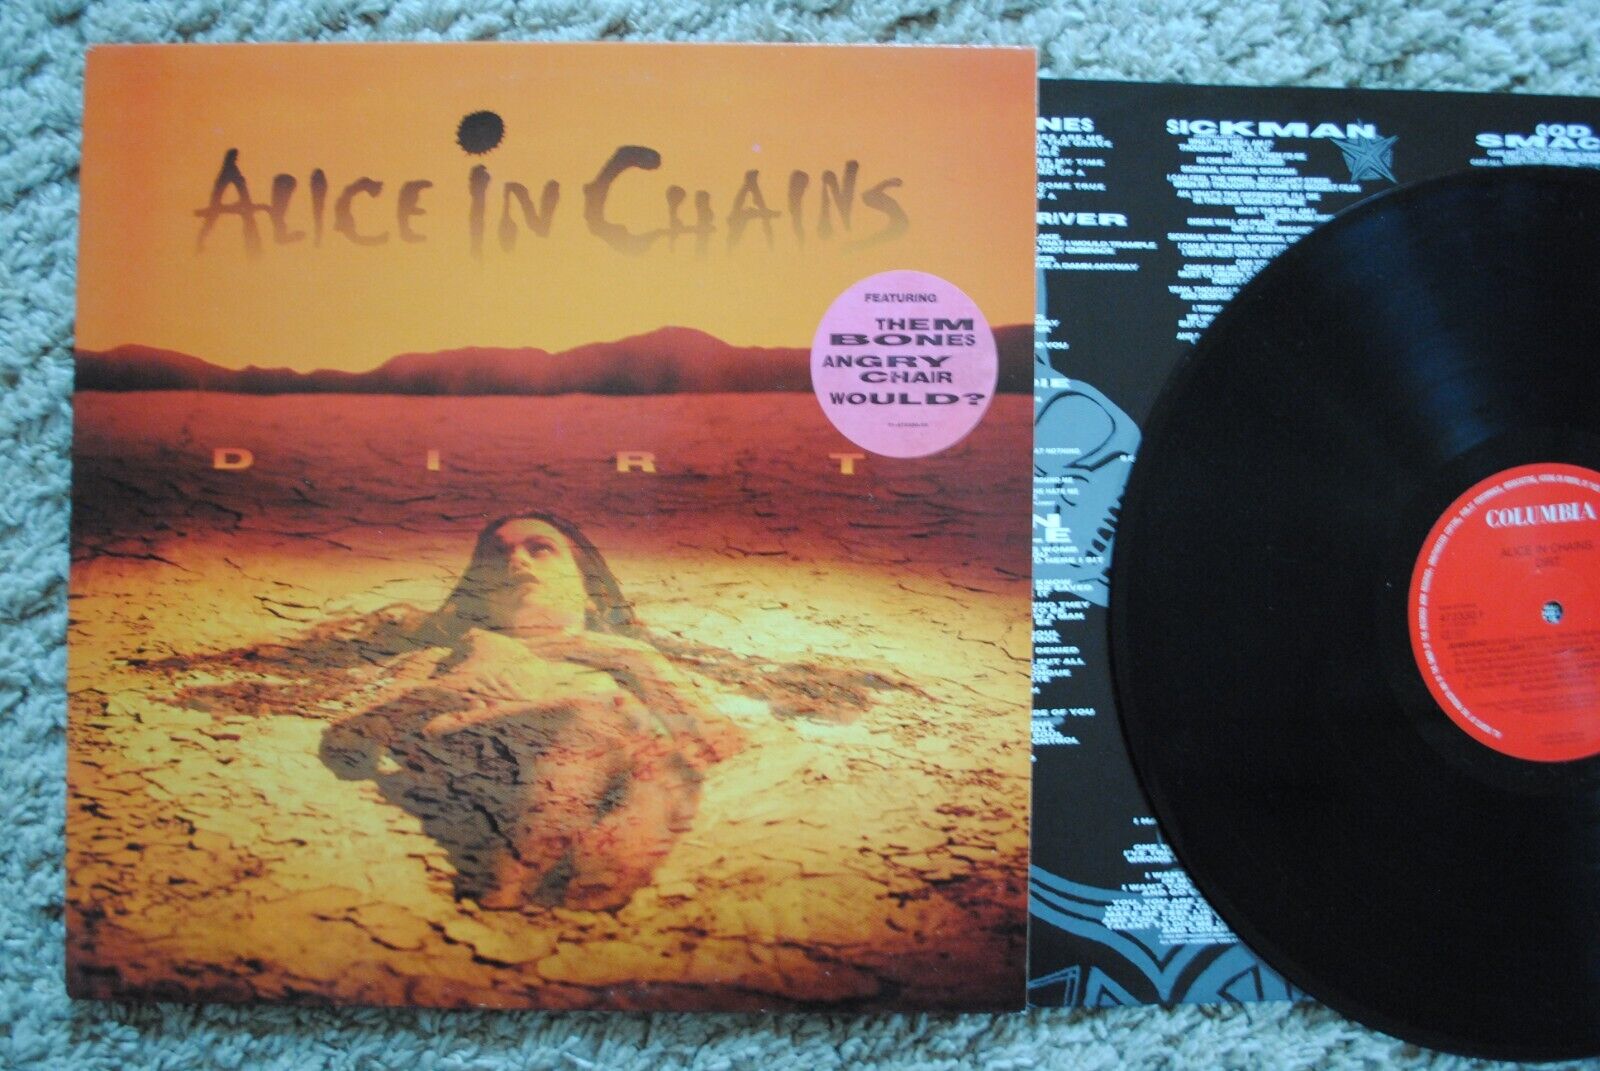 1 X VINYL FIRST PRESS ALICE IN CHAINS DIRT HYPE STICKER SONY 1992 pearl jam